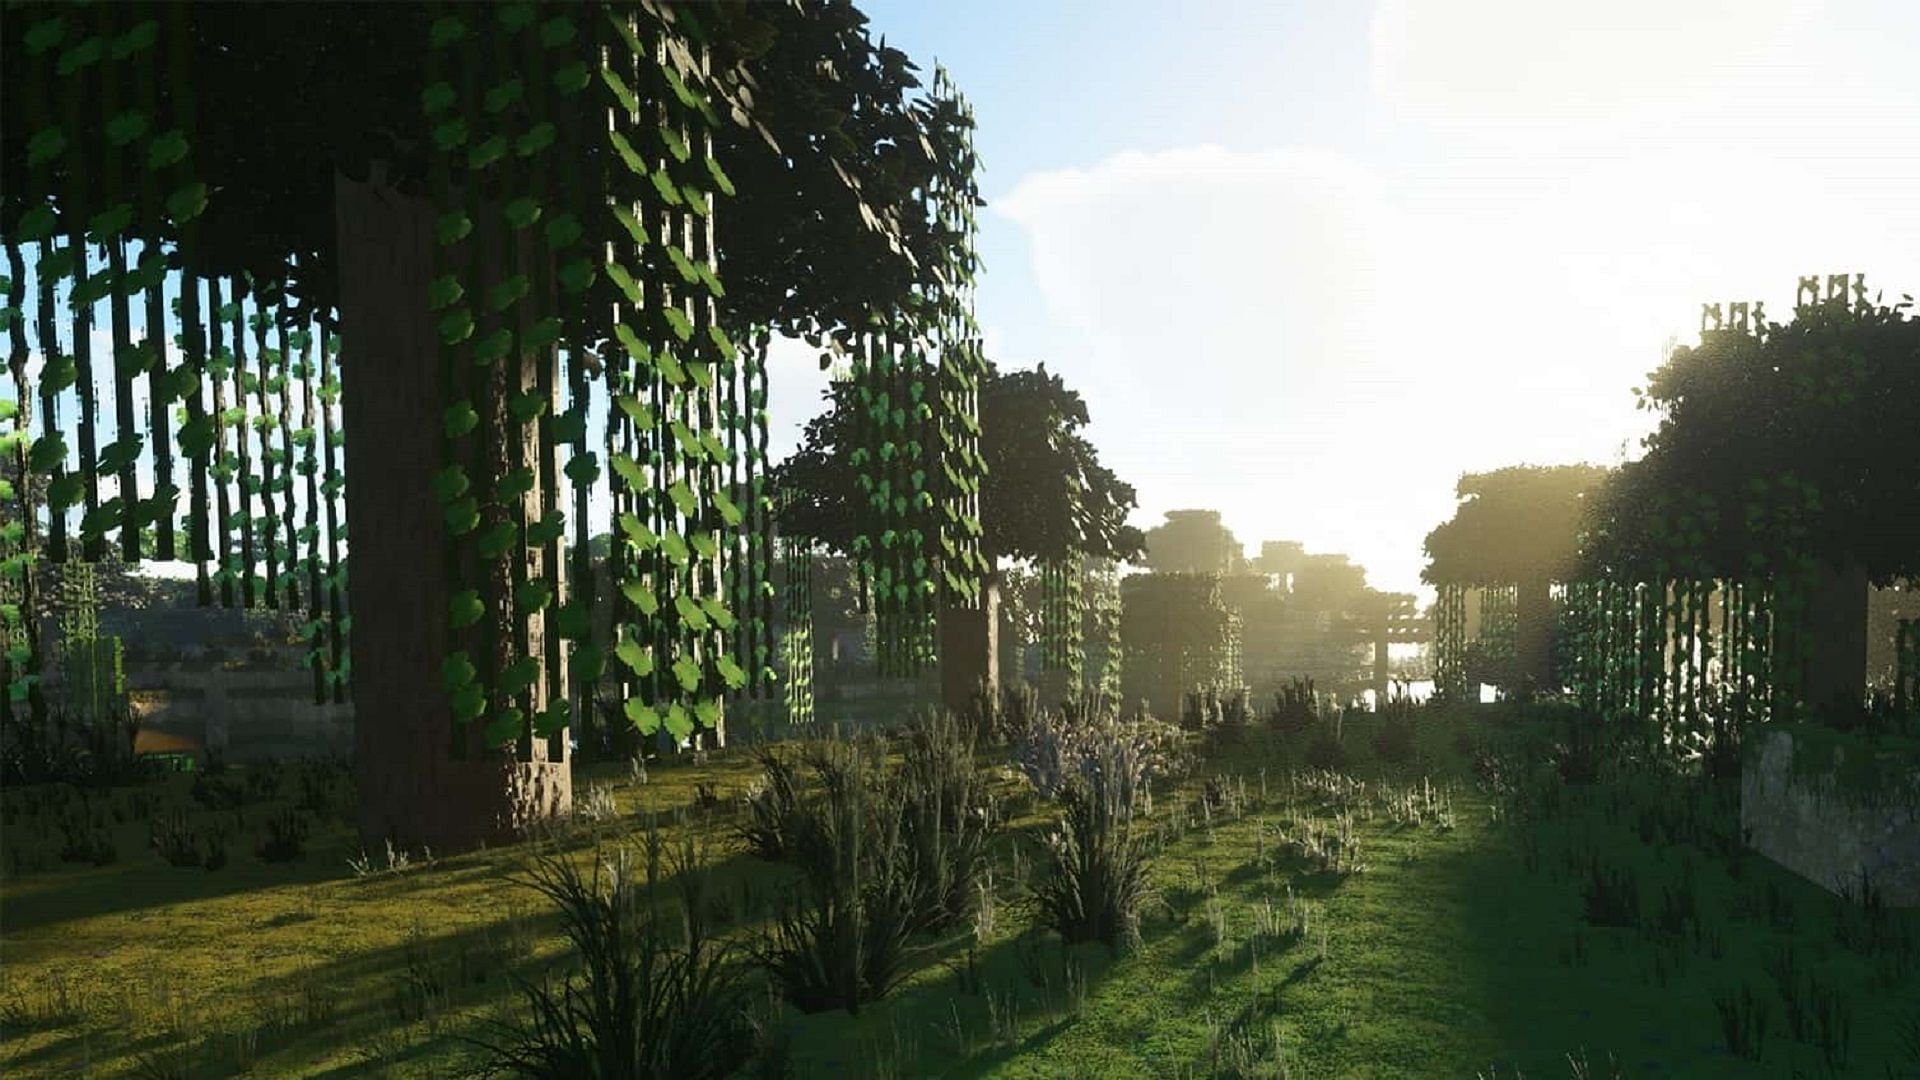 Optimum Realism&#039;s textures are truly a sight to behold in Minecraft: Bedrock Edition (Image via Atmosphere_Of_Tech/Resourcepack.net)